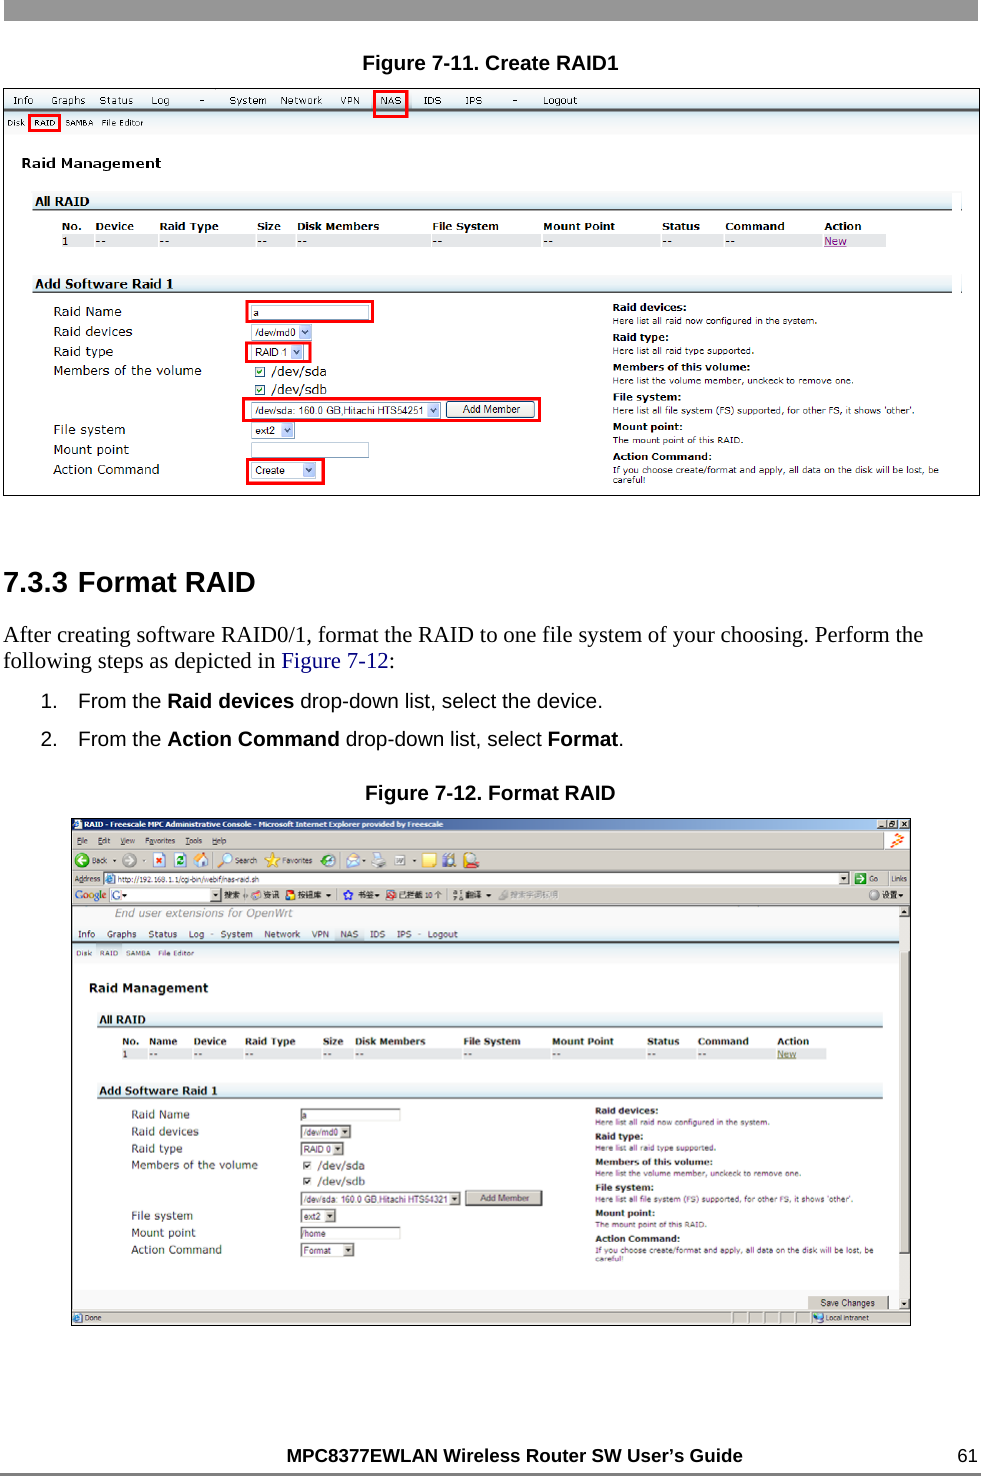                                                          MPC8377EWLAN Wireless Router SW User’s Guide    61 Figure 7-11. Create RAID1  7.3.3 Format RAID After creating software RAID0/1, format the RAID to one file system of your choosing. Perform the following steps as depicted in Figure 7-12: 1. From the Raid devices drop-down list, select the device. 2. From the Action Command drop-down list, select Format. Figure 7-12. Format RAID   